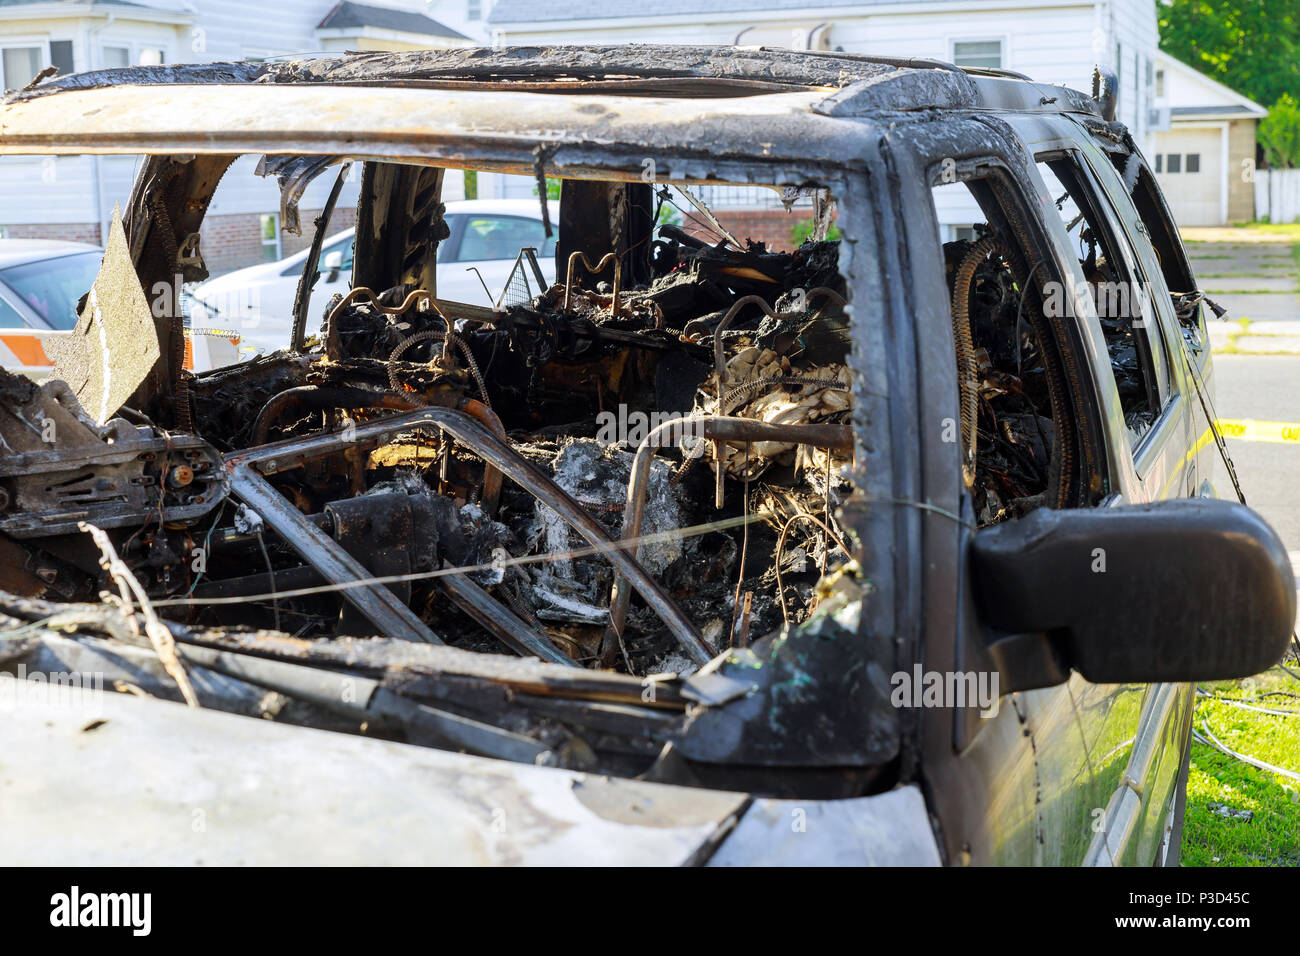 The front wing of the car and the wheel without a tire after the fire. Burned car Stock Photo